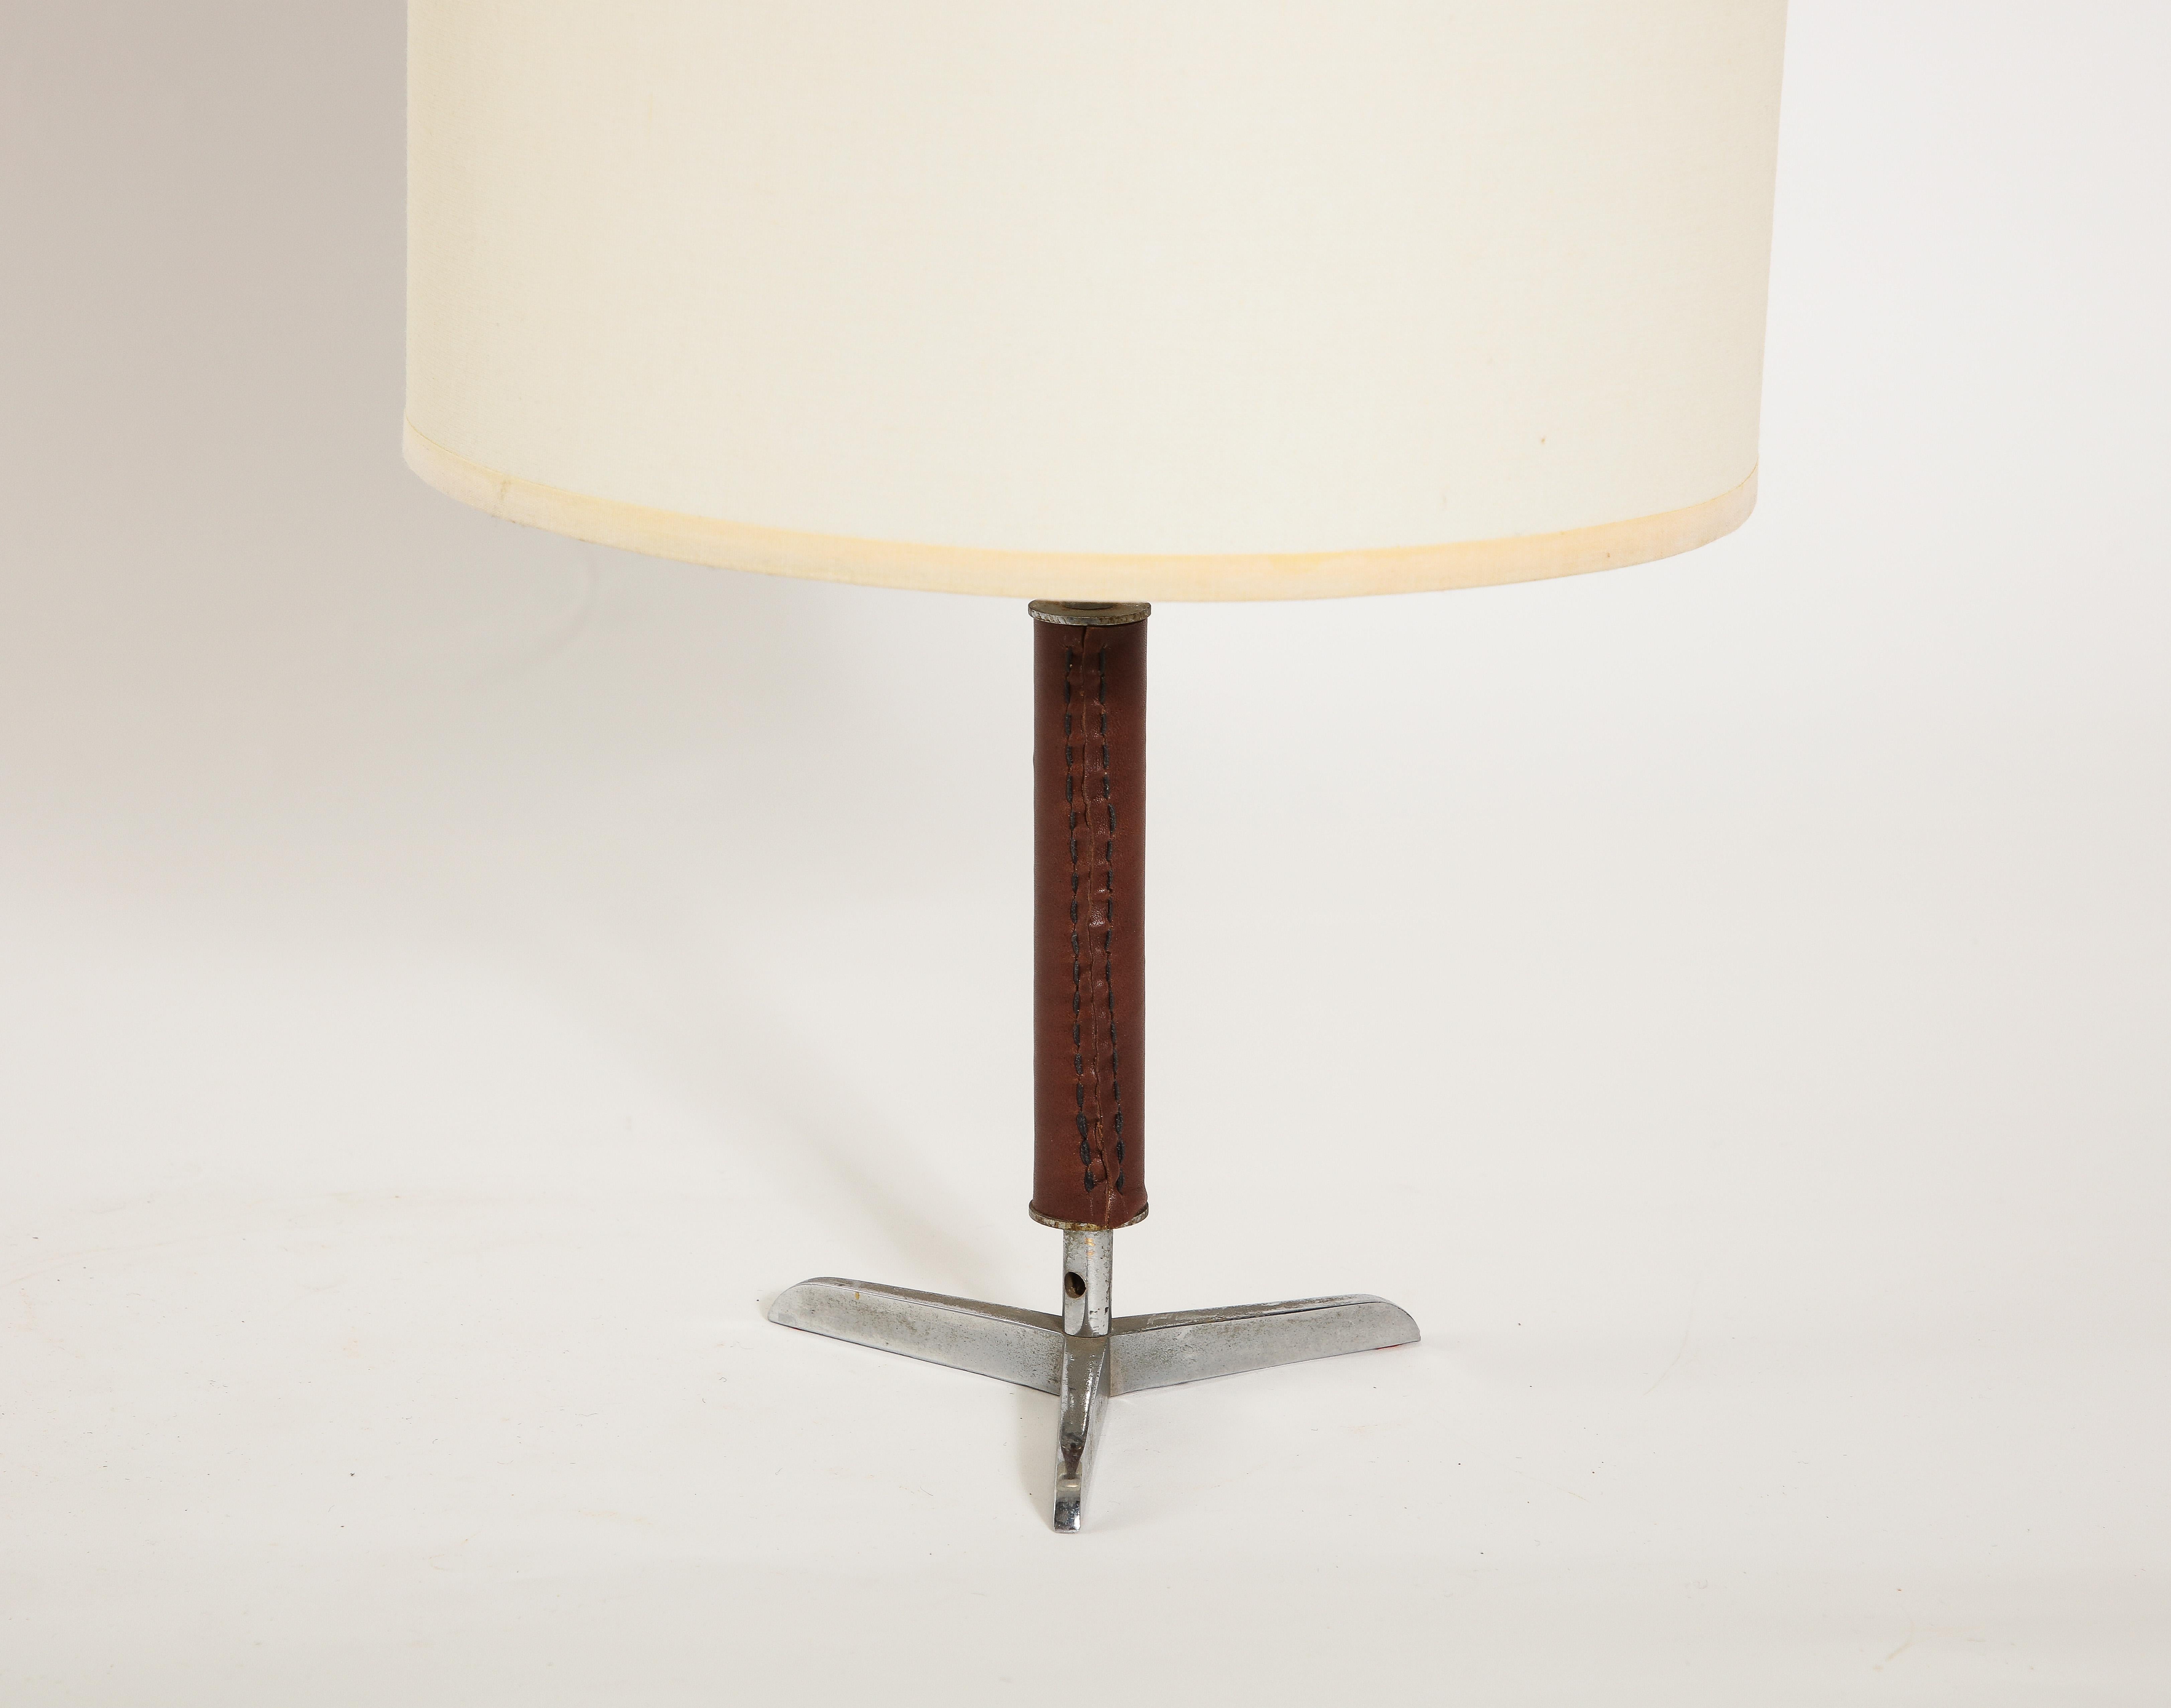 Tripod nickel table lamp with a brown leather trim.

12x5 base Only